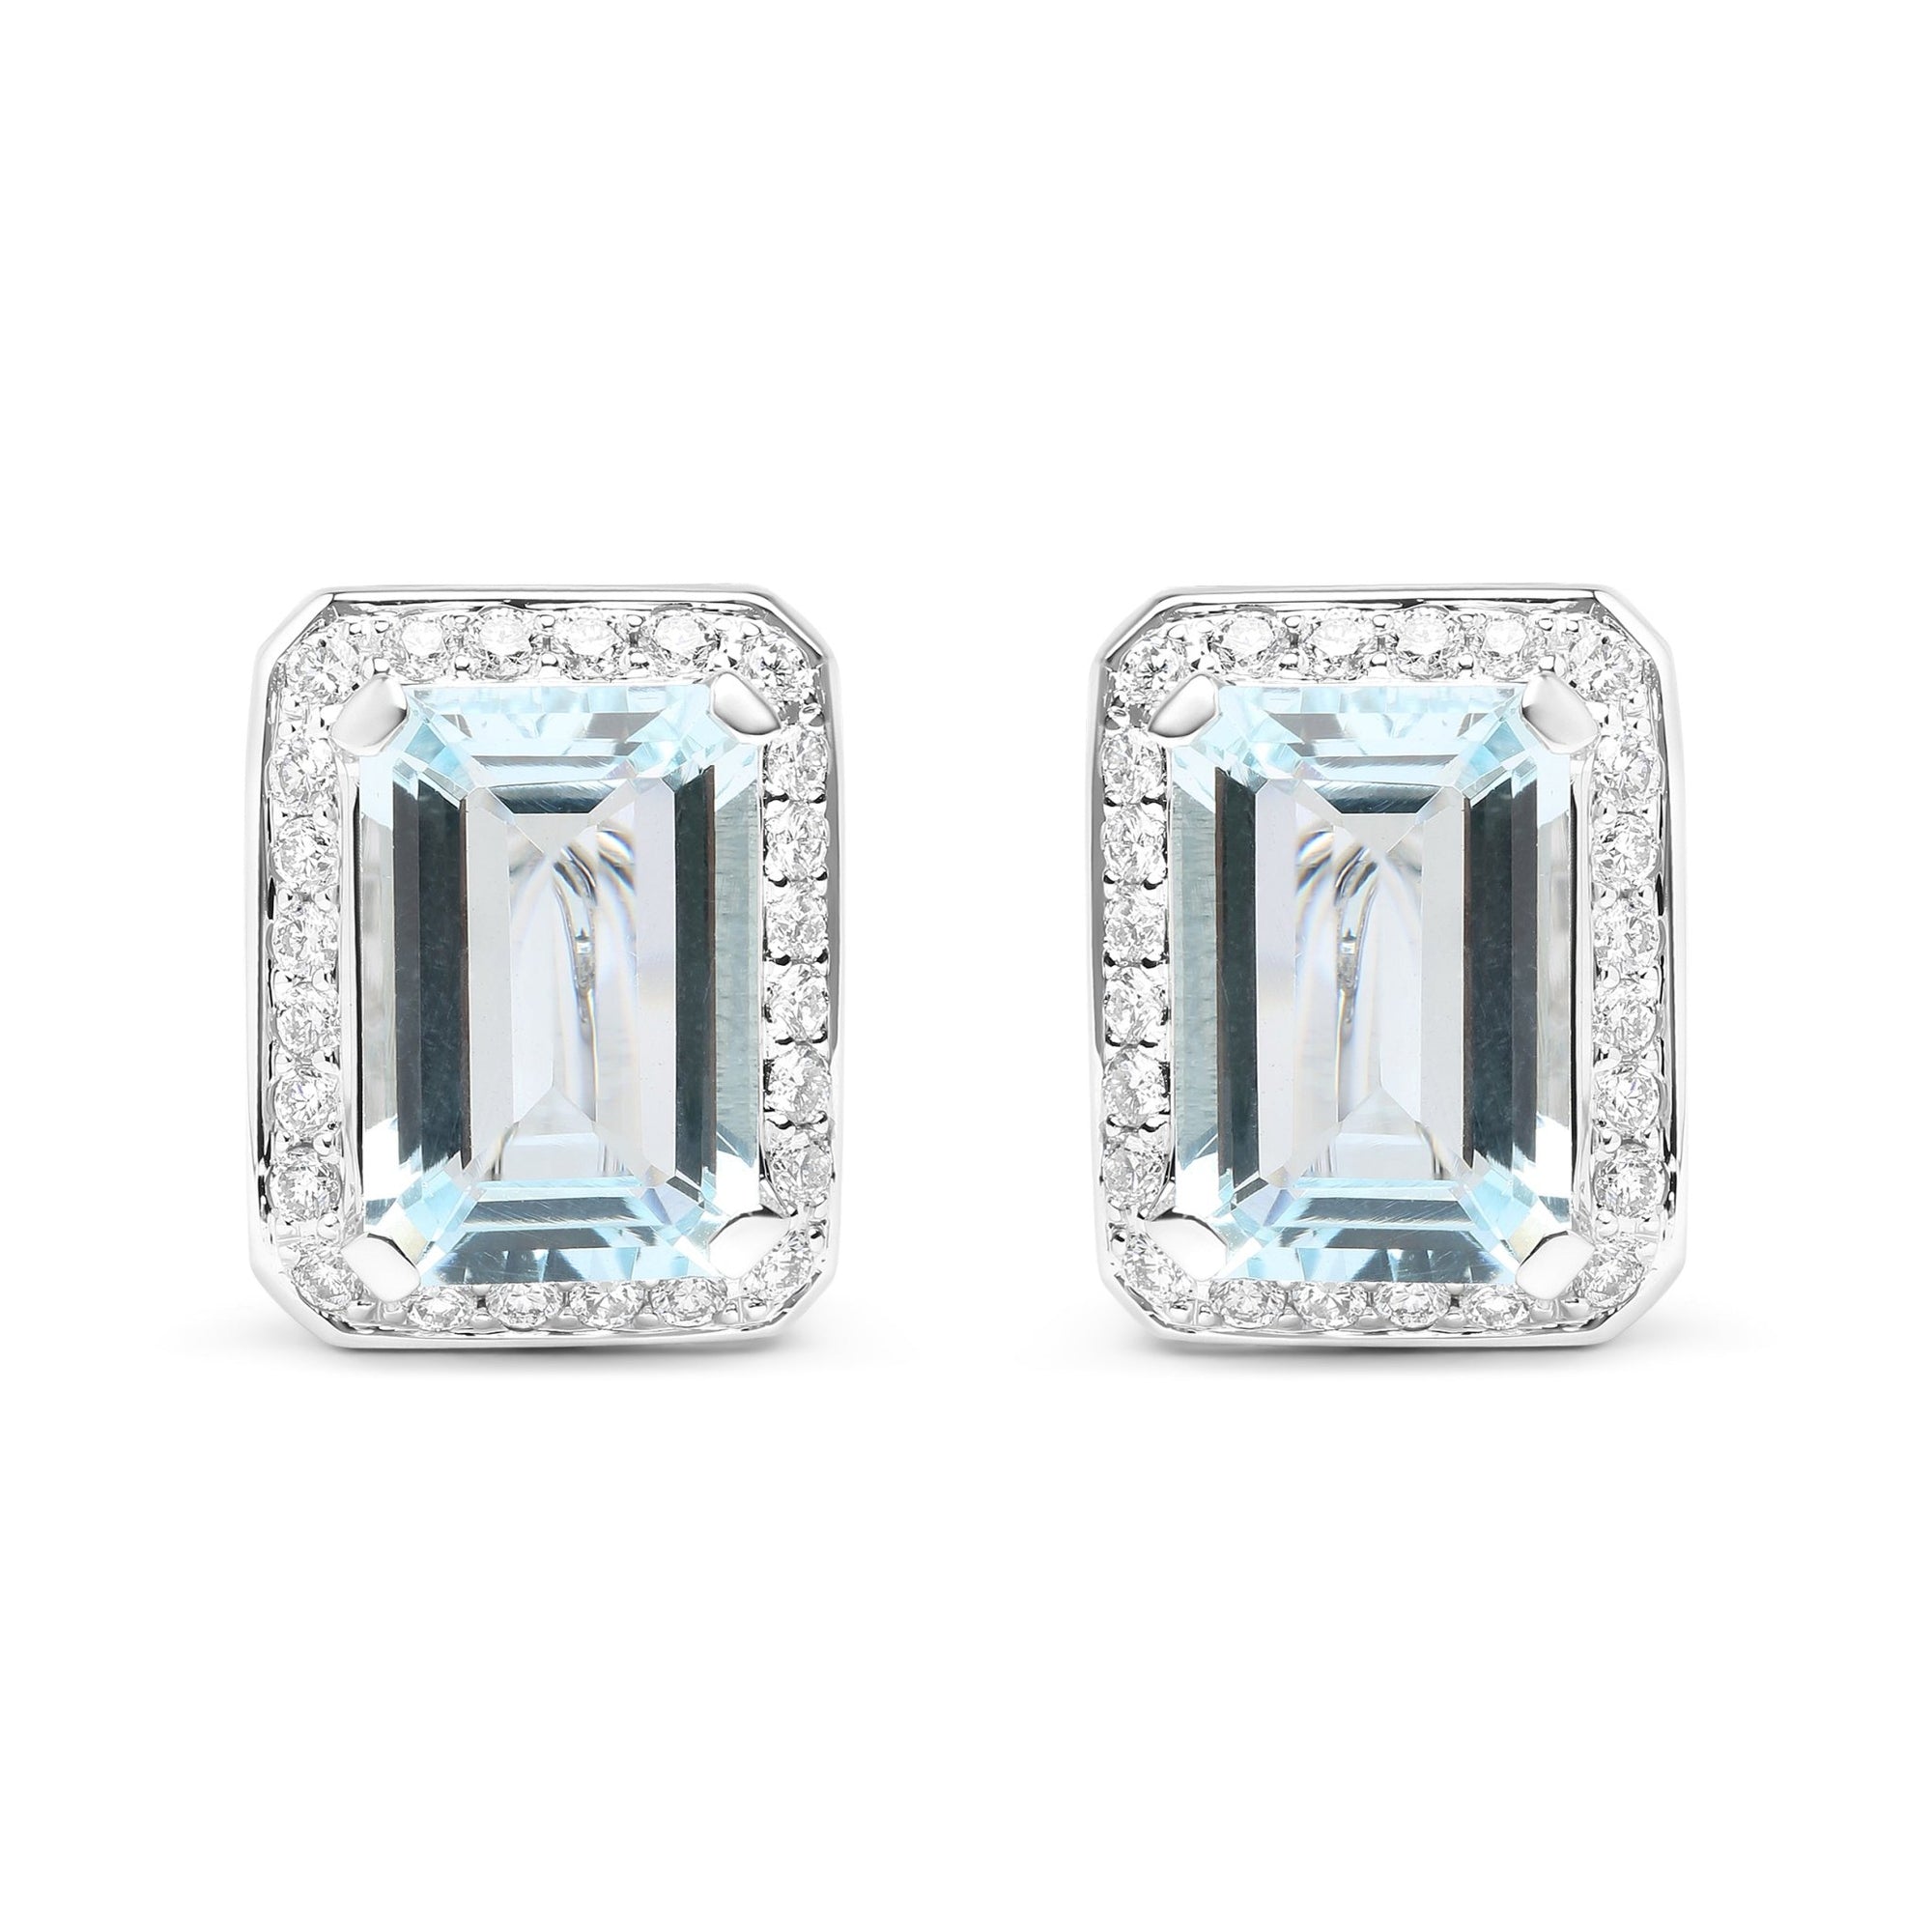 18K White Gold 3/4 Cttw Round Diamond and 13x9mm Emerald Cut Blue Aquamarine Gemstone Halo Omega Stud Earrings (G-H Color, SI1-SI2 Clarity) - LinkagejewelrydesignLinkagejewelrydesign